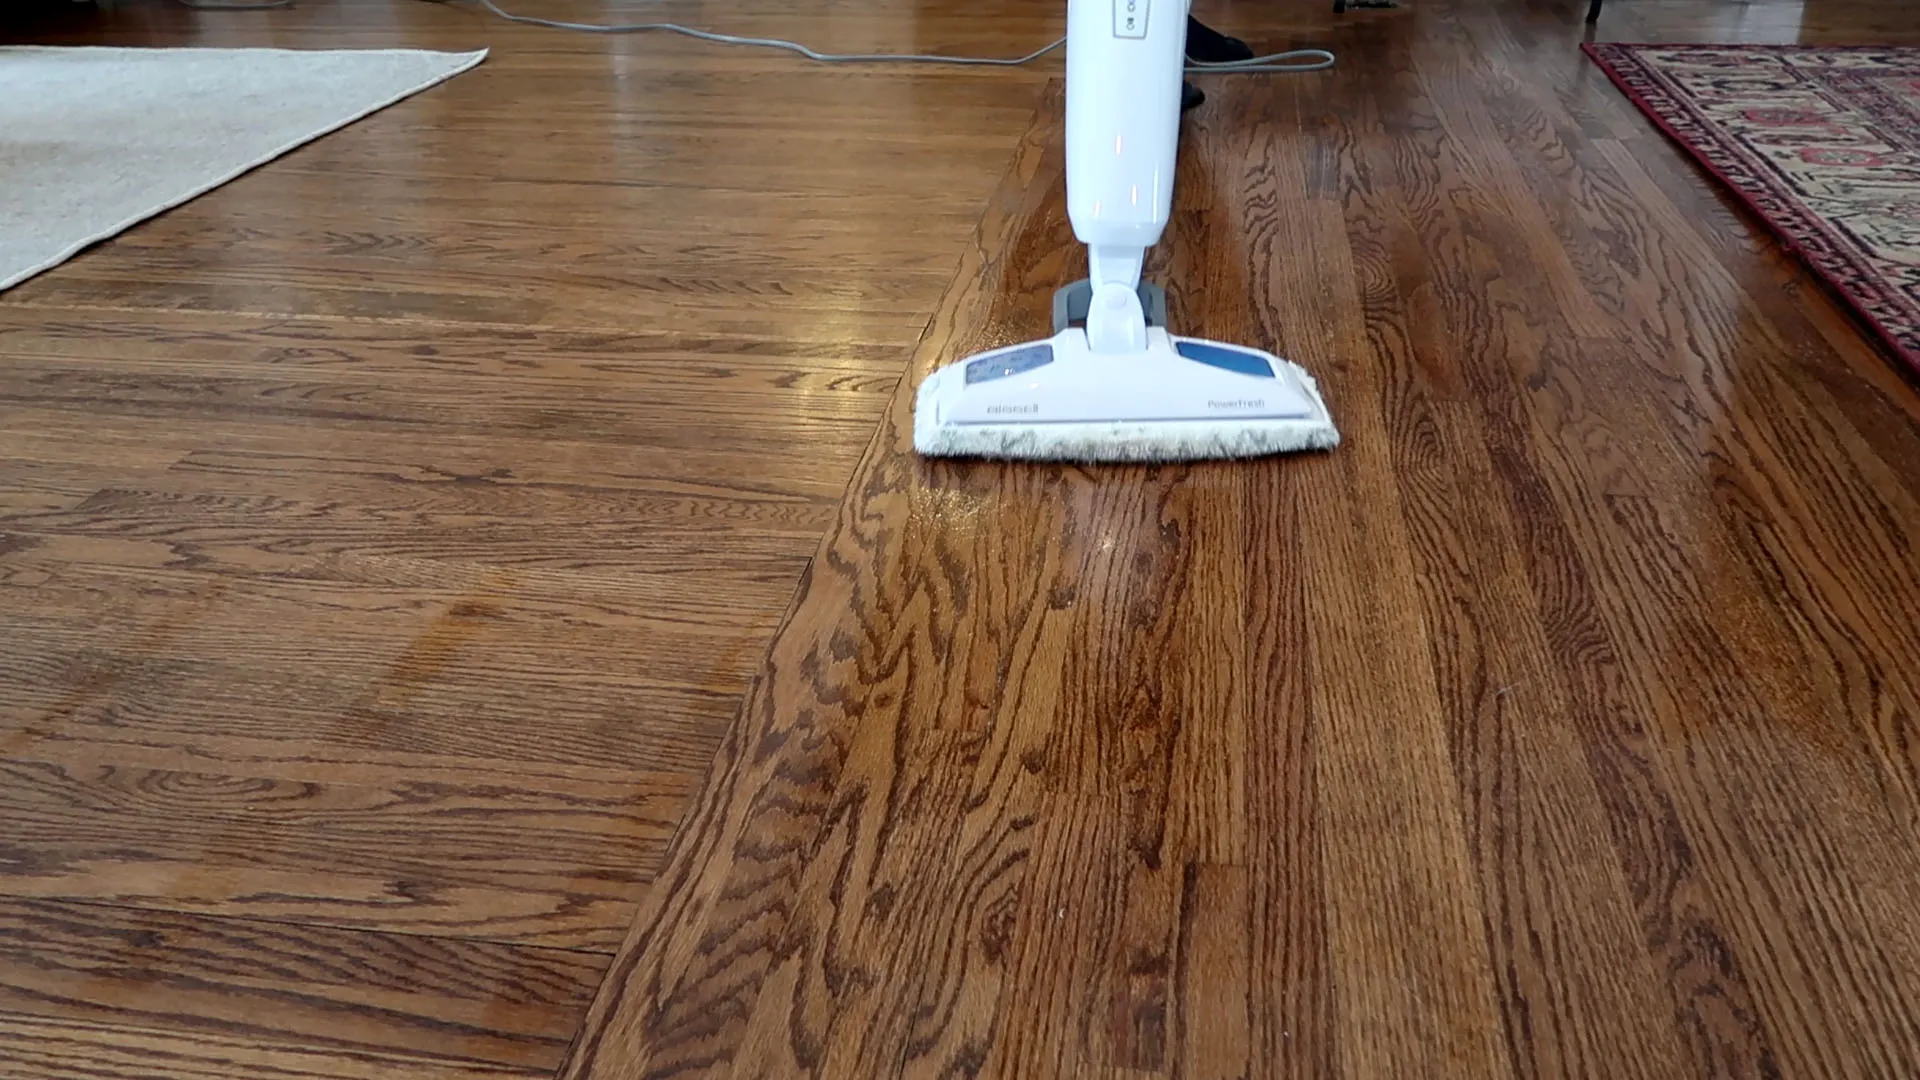 What Floors Can You Use a Steam Mop on